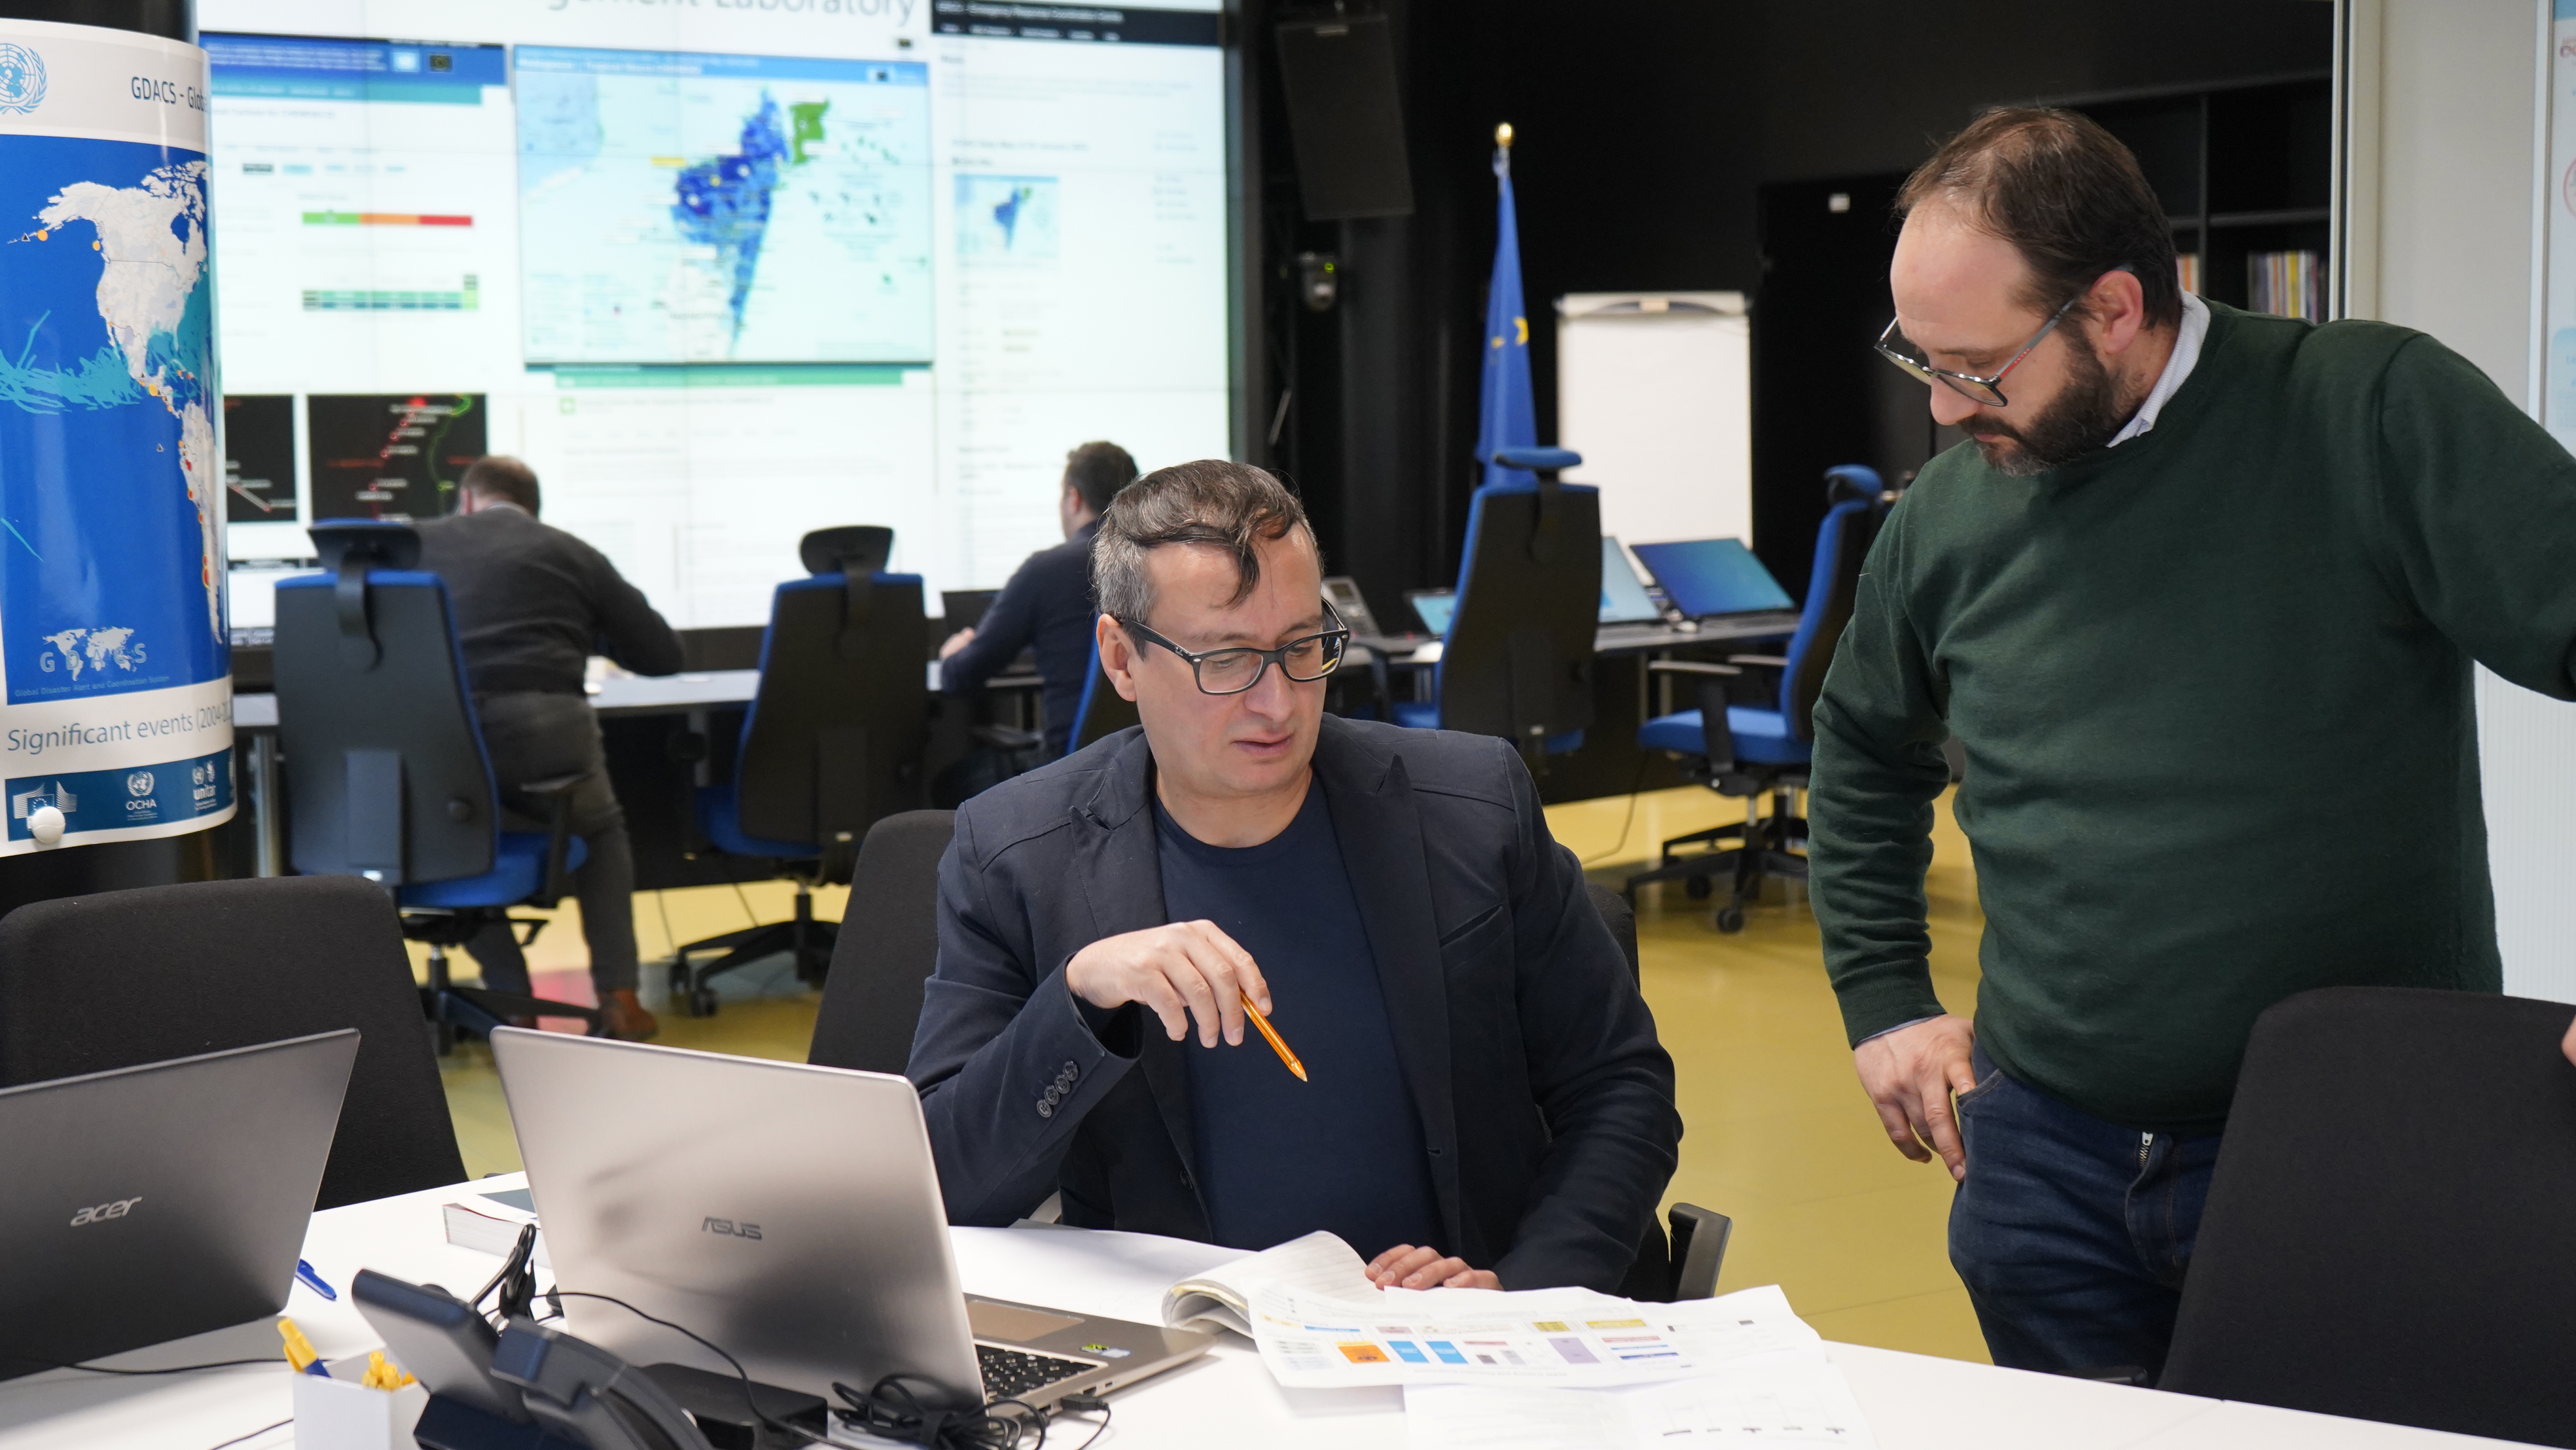 Two researchers working at the European Crisis Management Laboratory